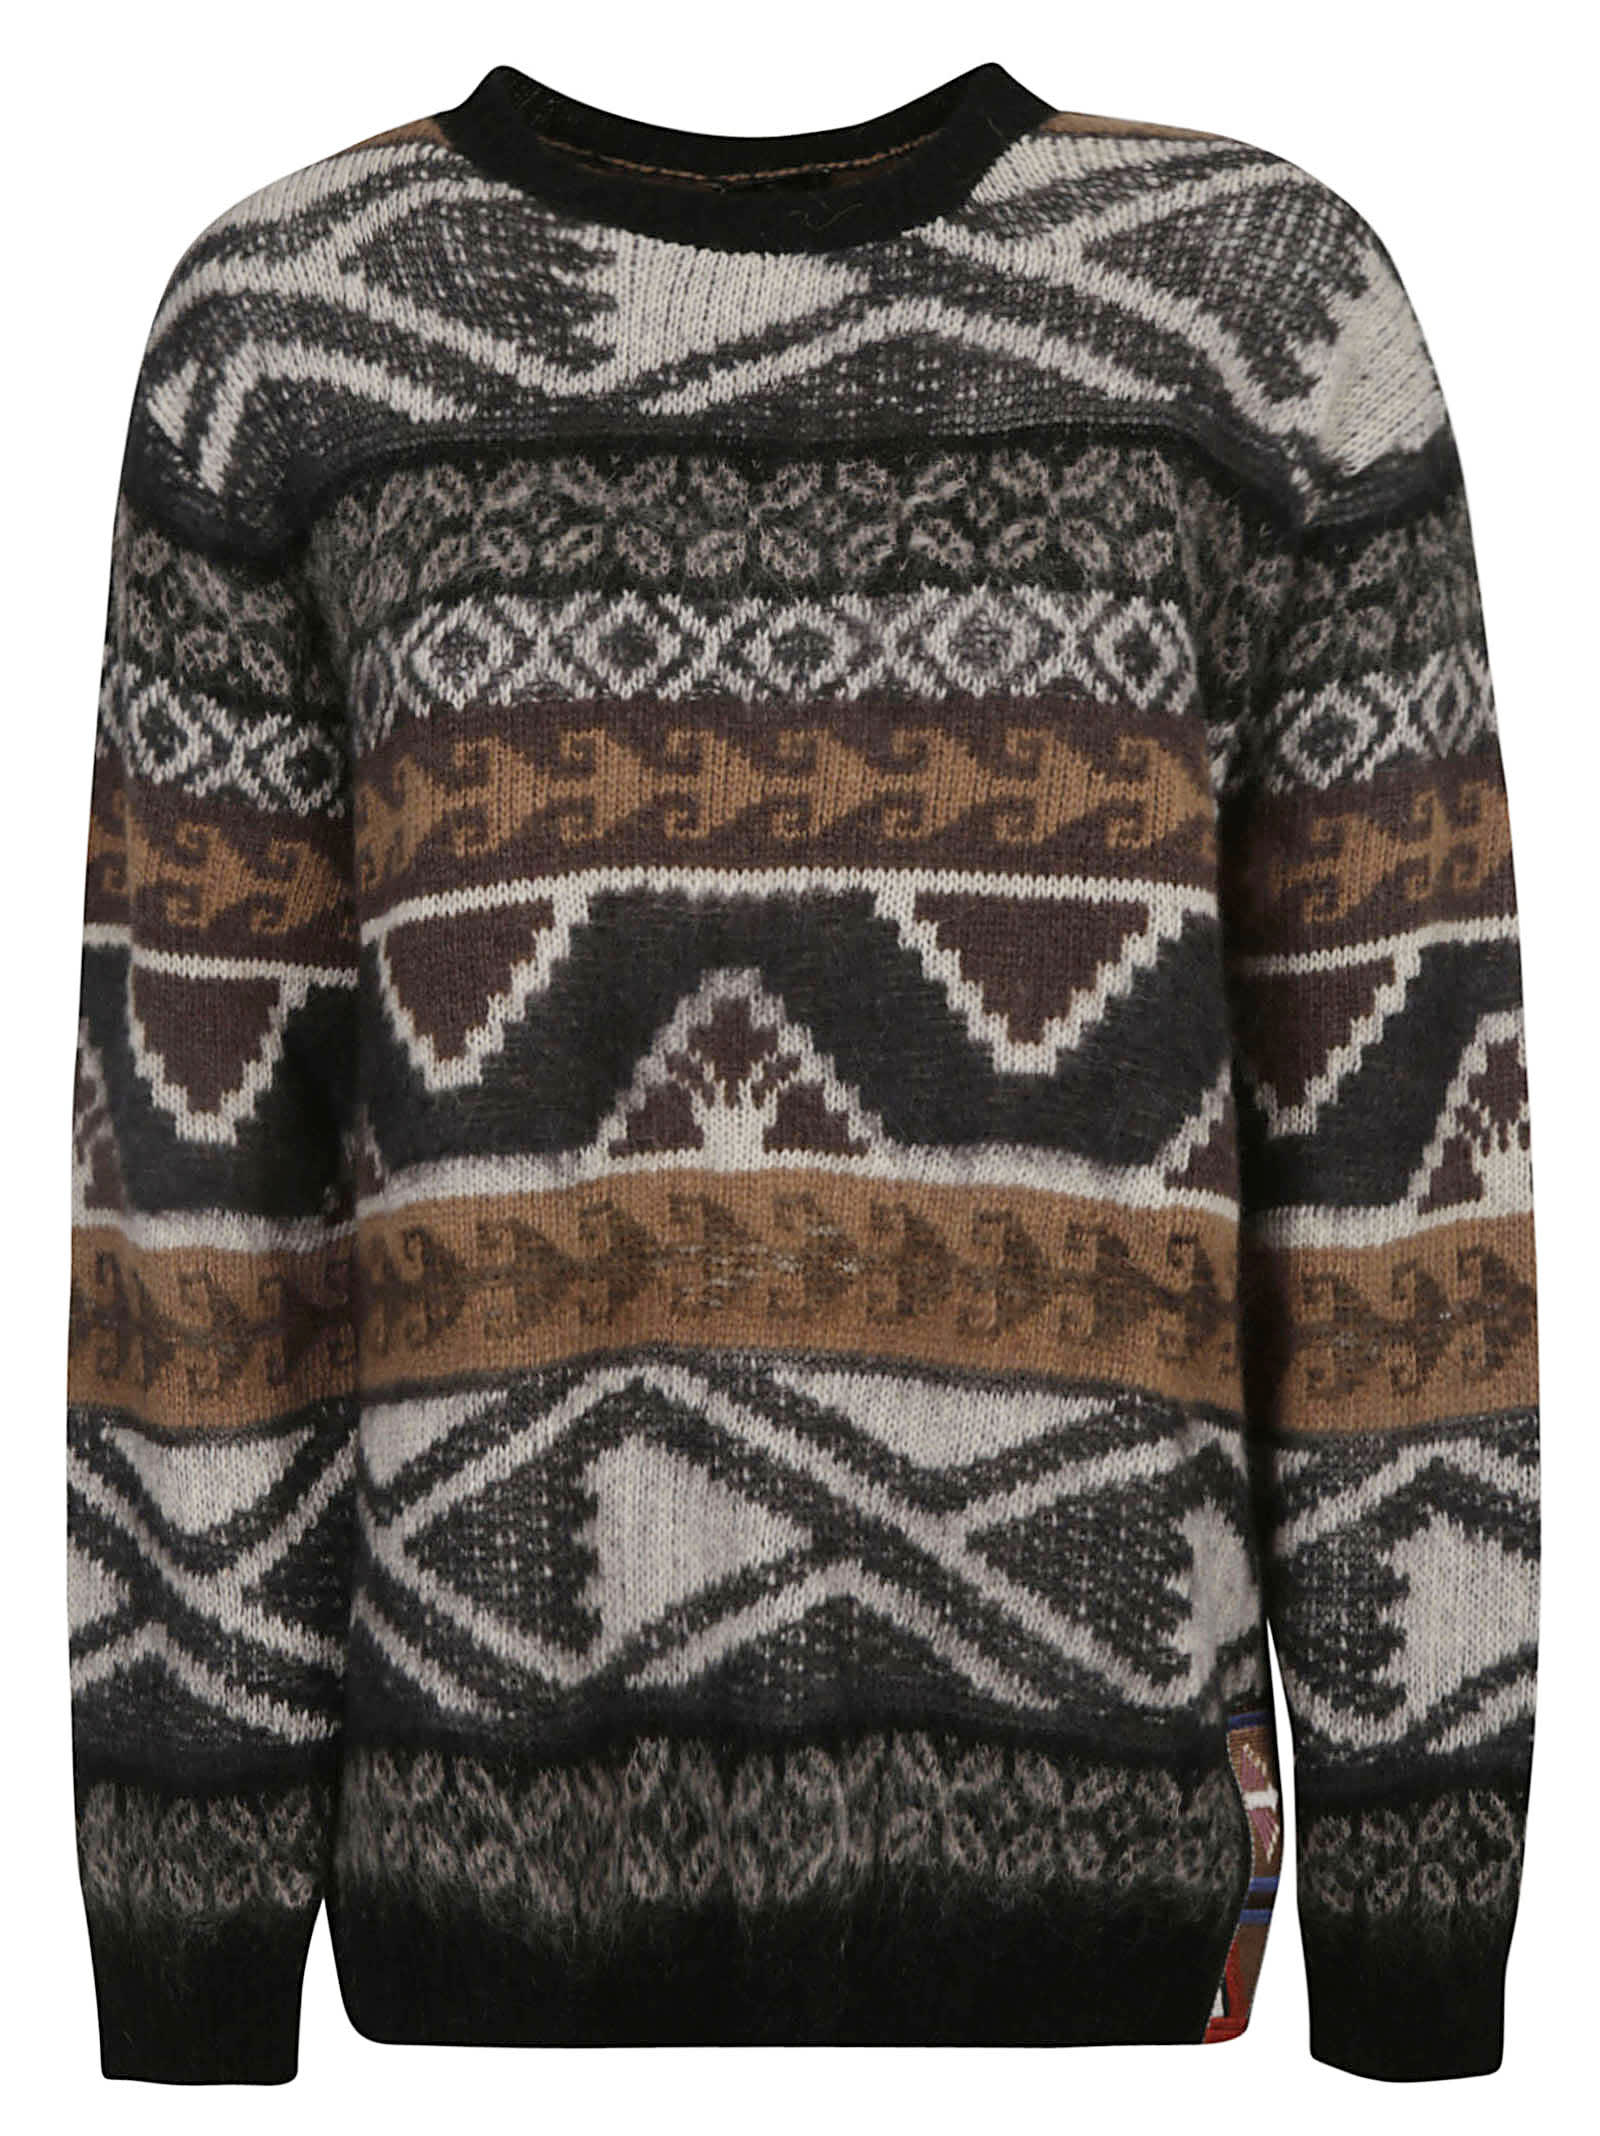 Etro Patterned Knit Sweater